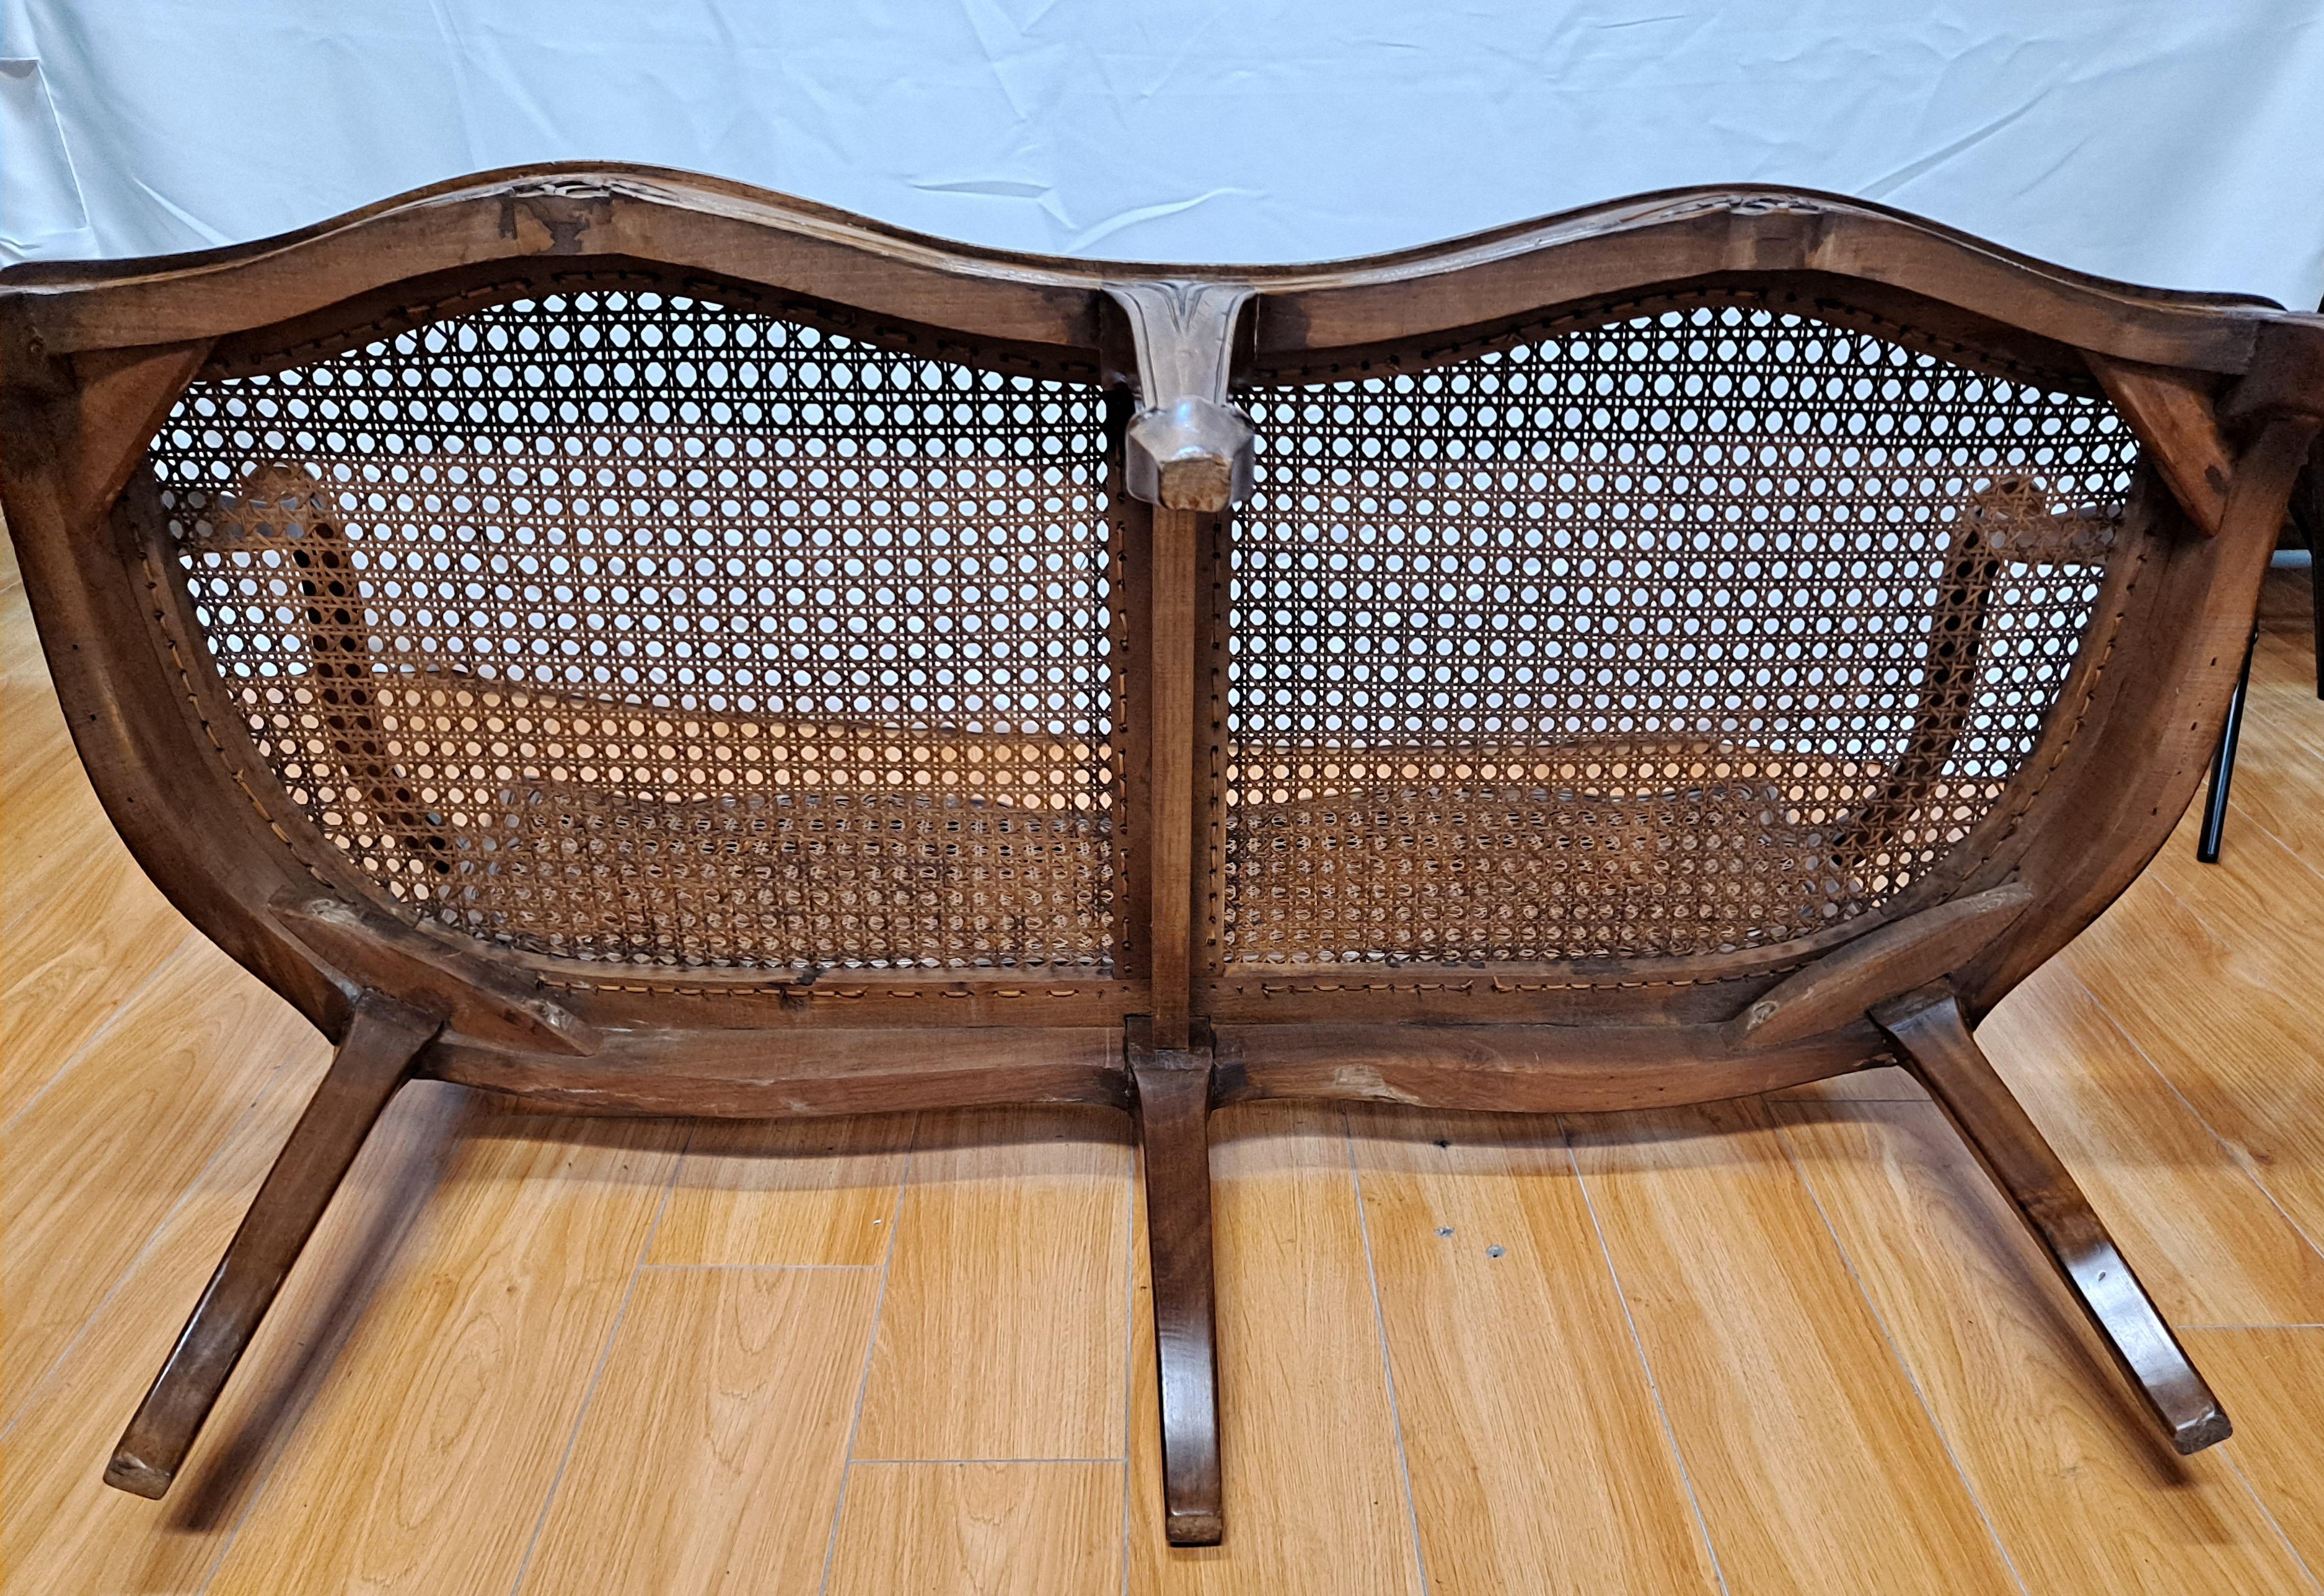 This Classic French bench features beautifully carved walnut with a caned seat and back.
Mid-20th century
Comfortably seats two.

Dimensions: 47